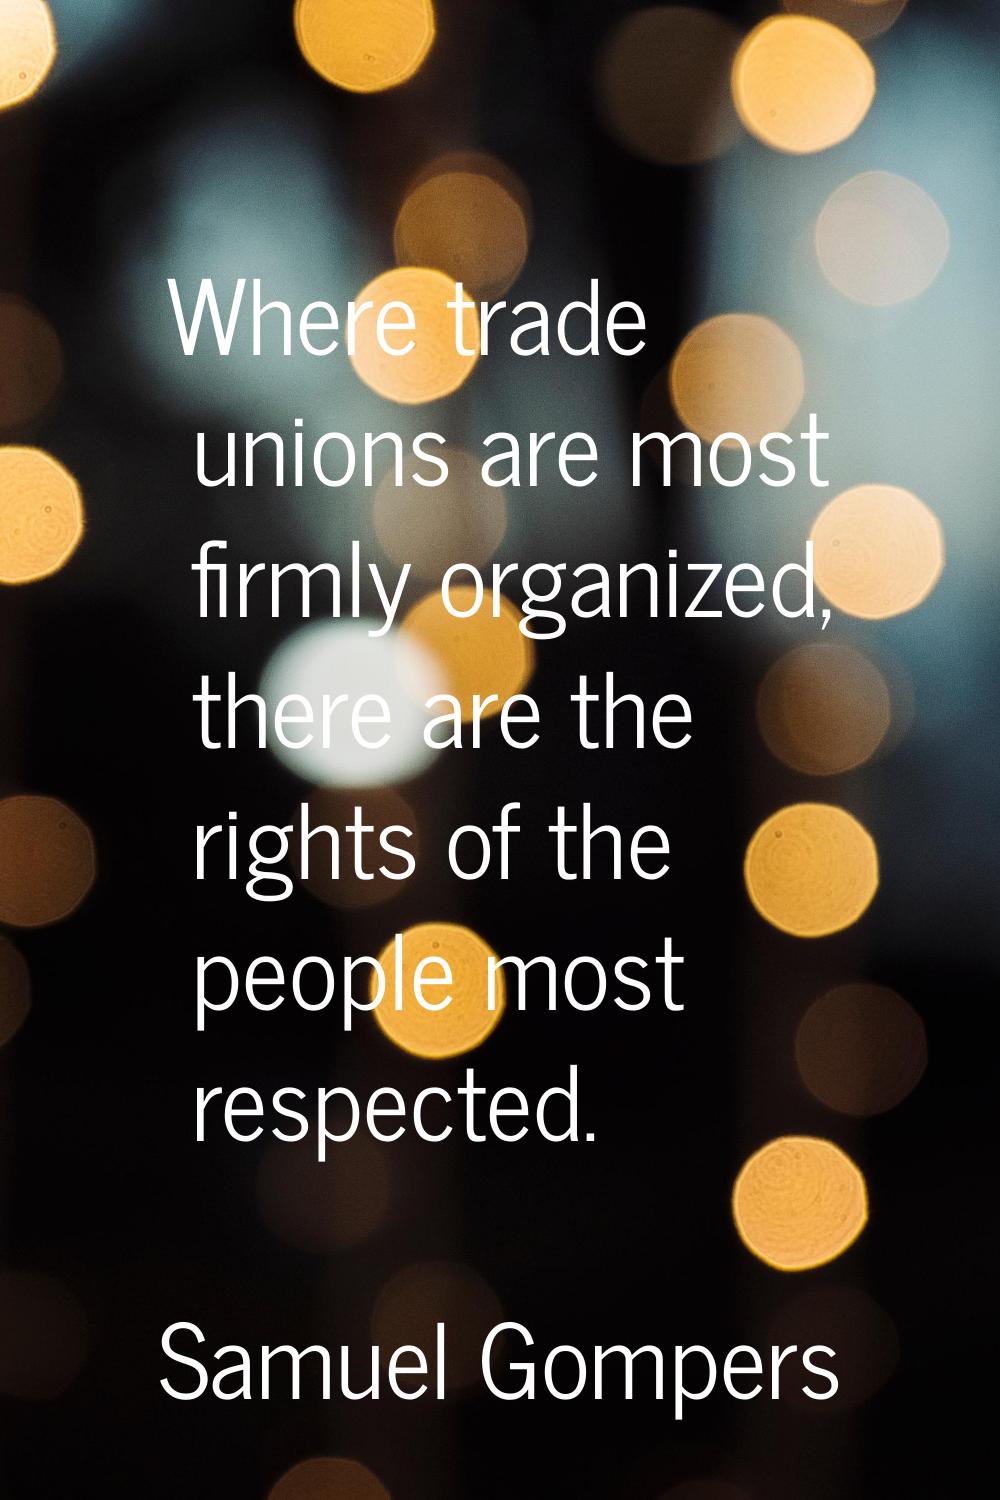 Where trade unions are most firmly organized, there are the rights of the people most respected.